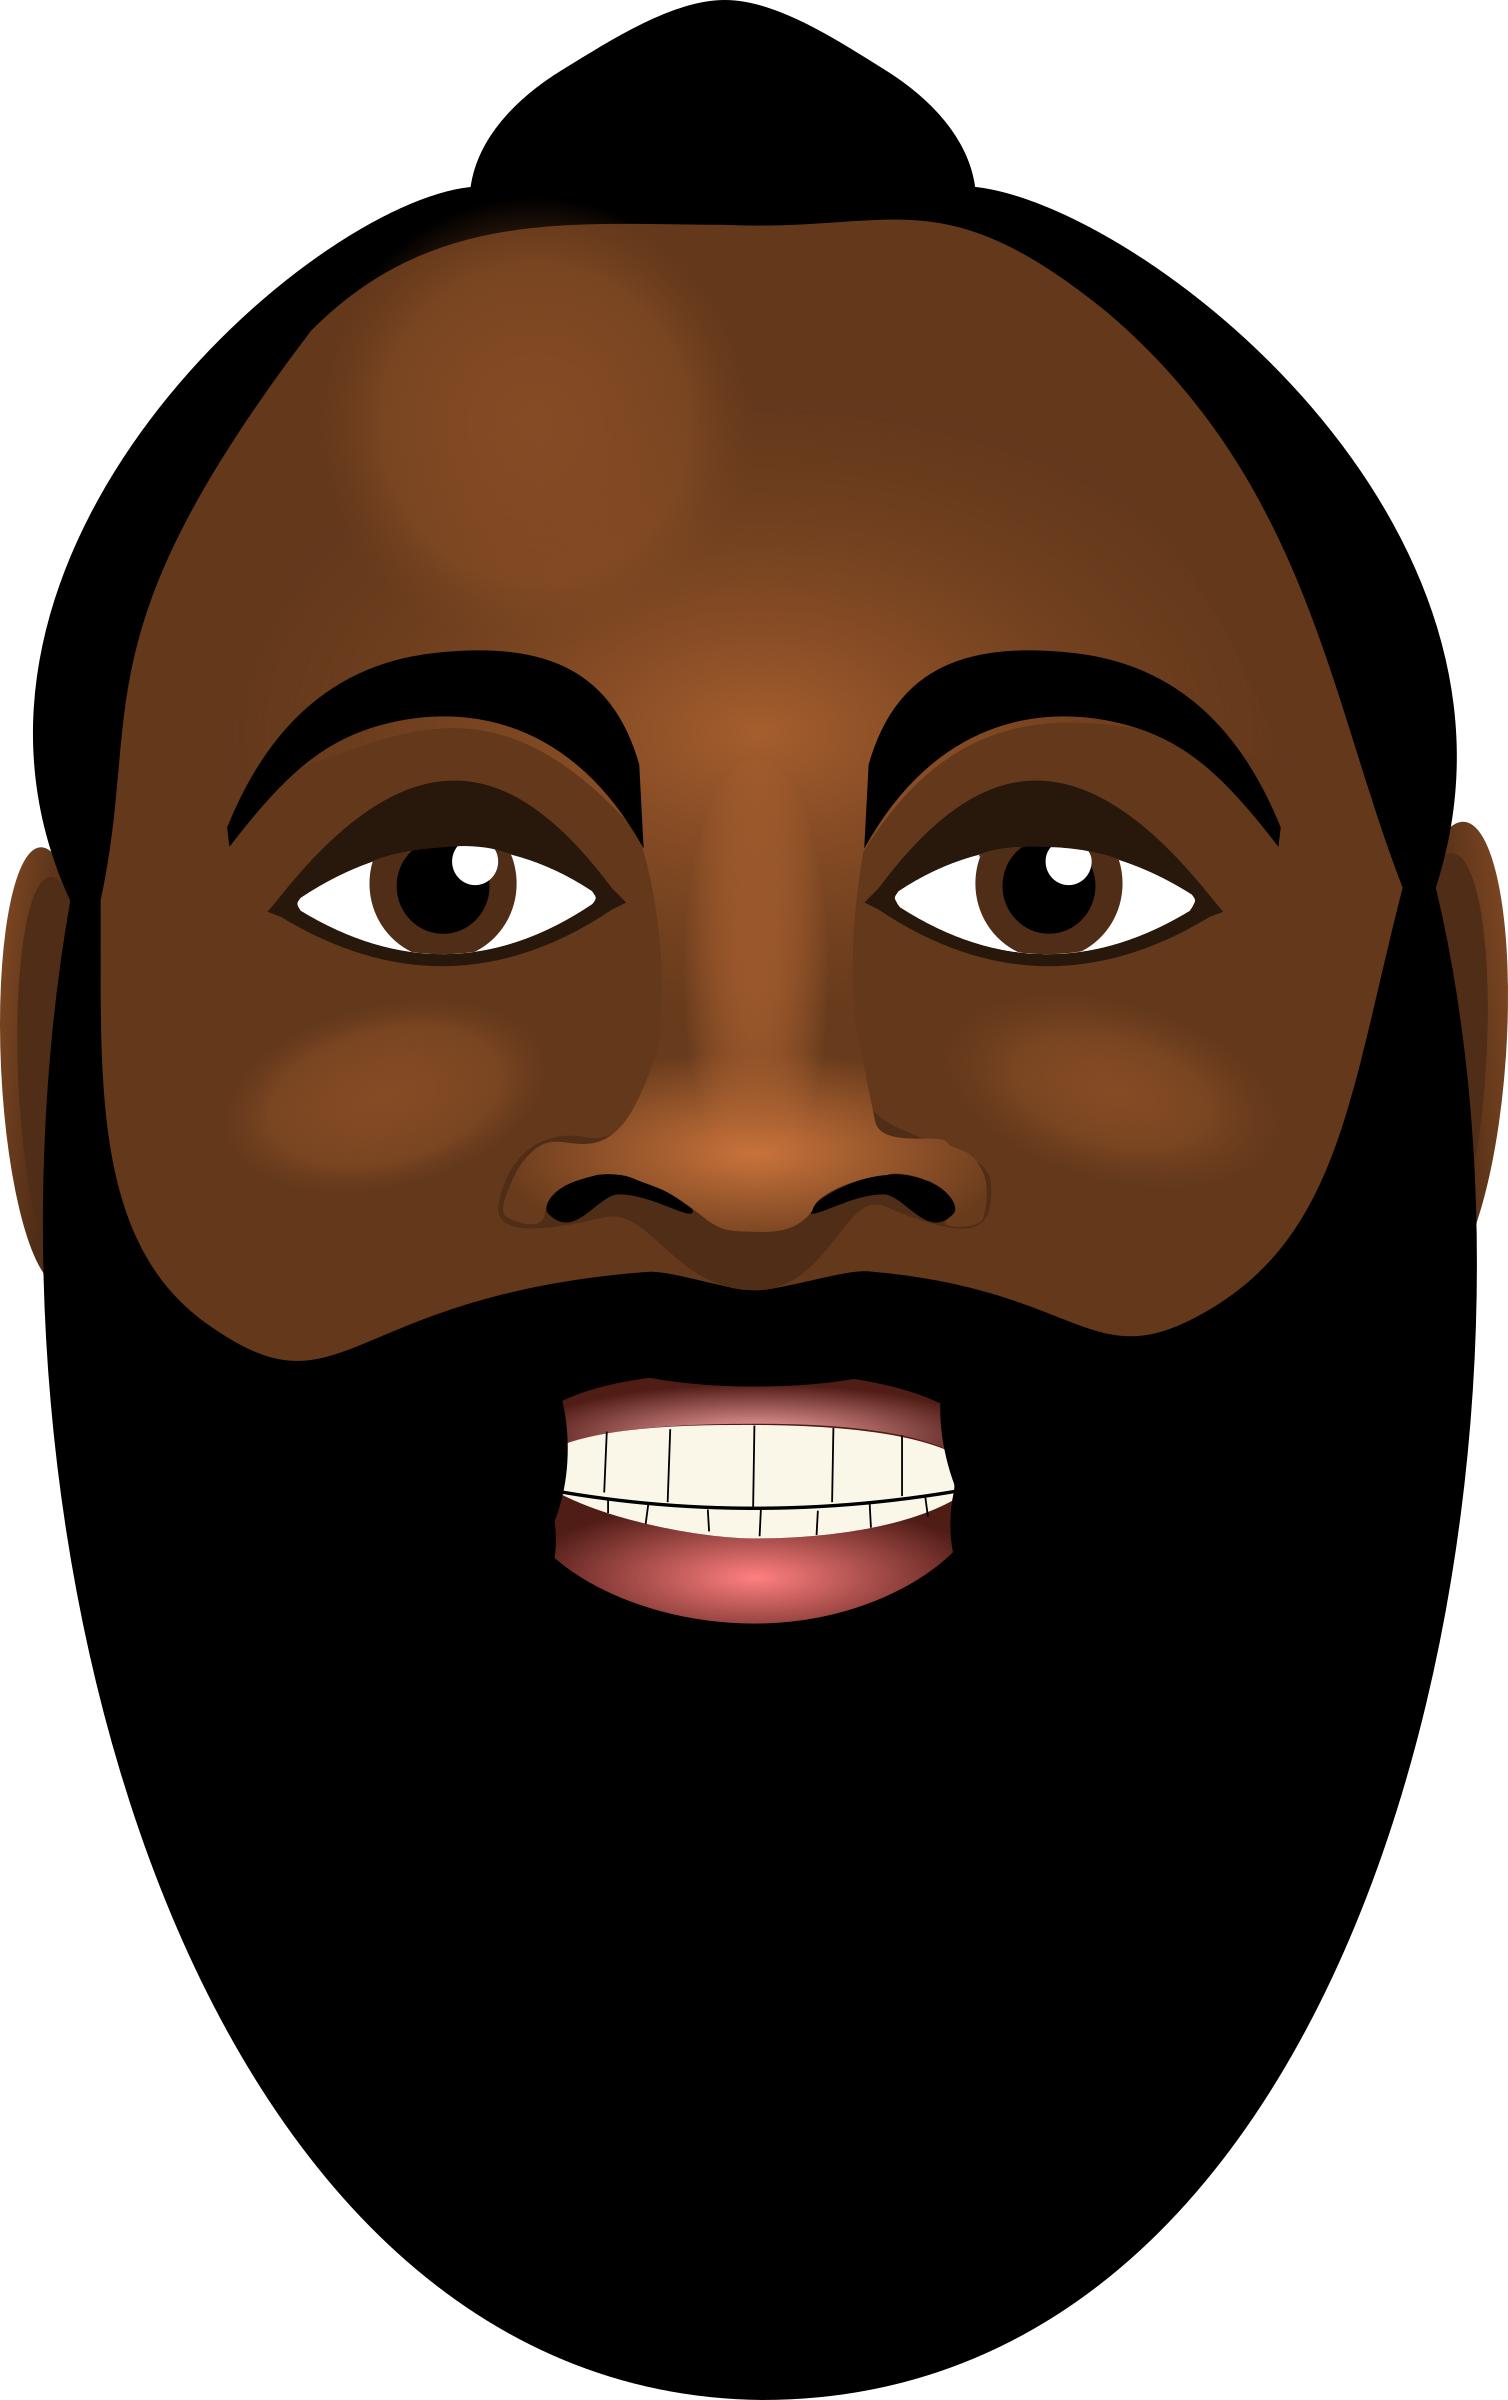 James Harden's face png